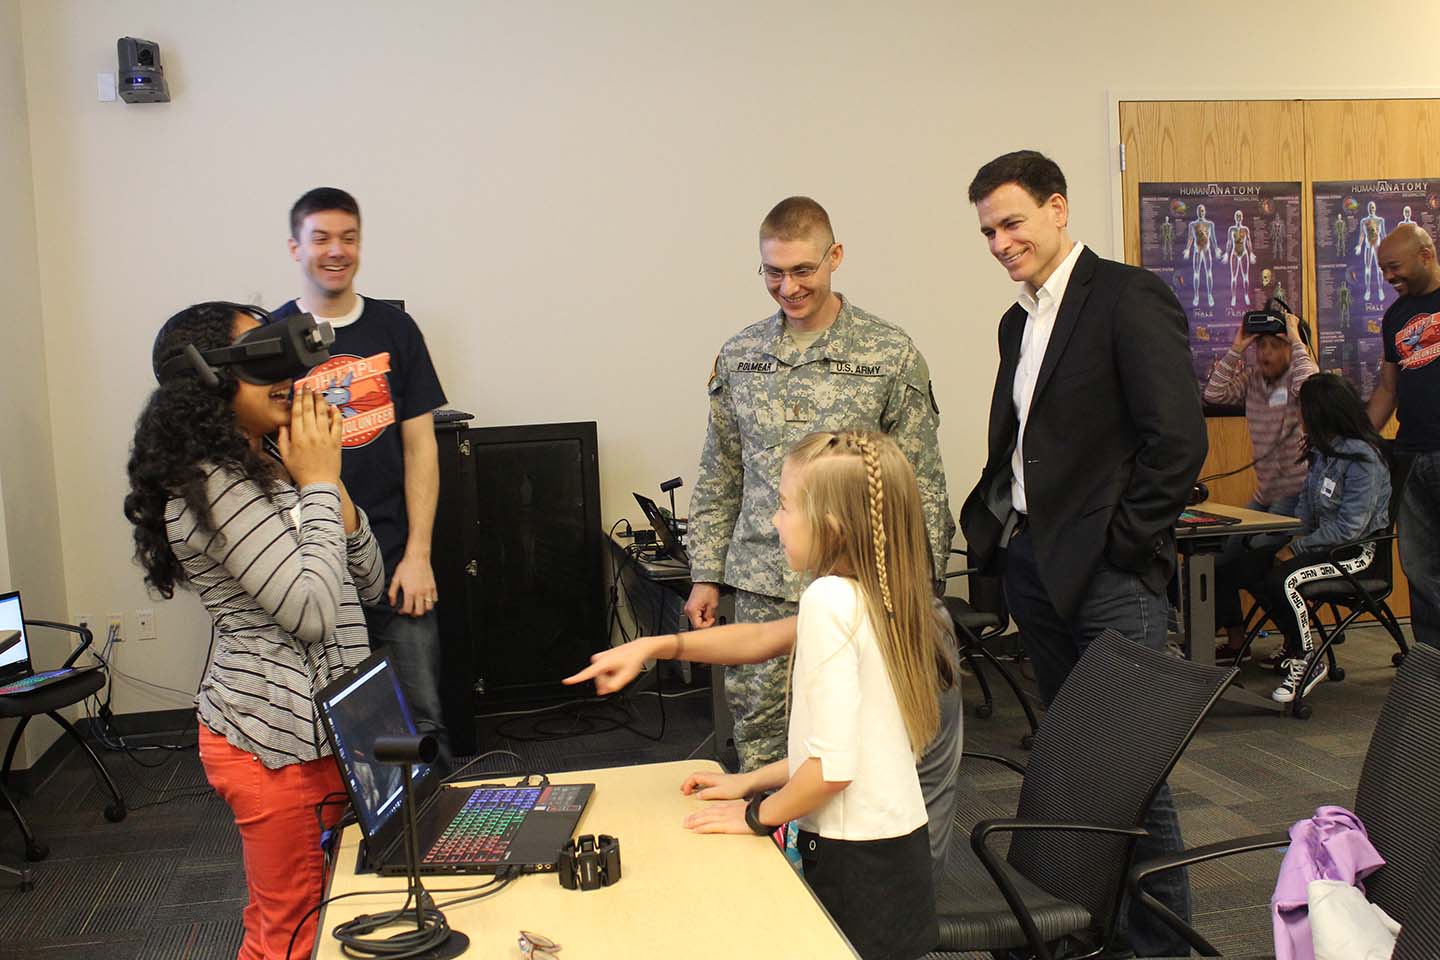 The children of servicemen and women learn about prosthetics using virtual reality